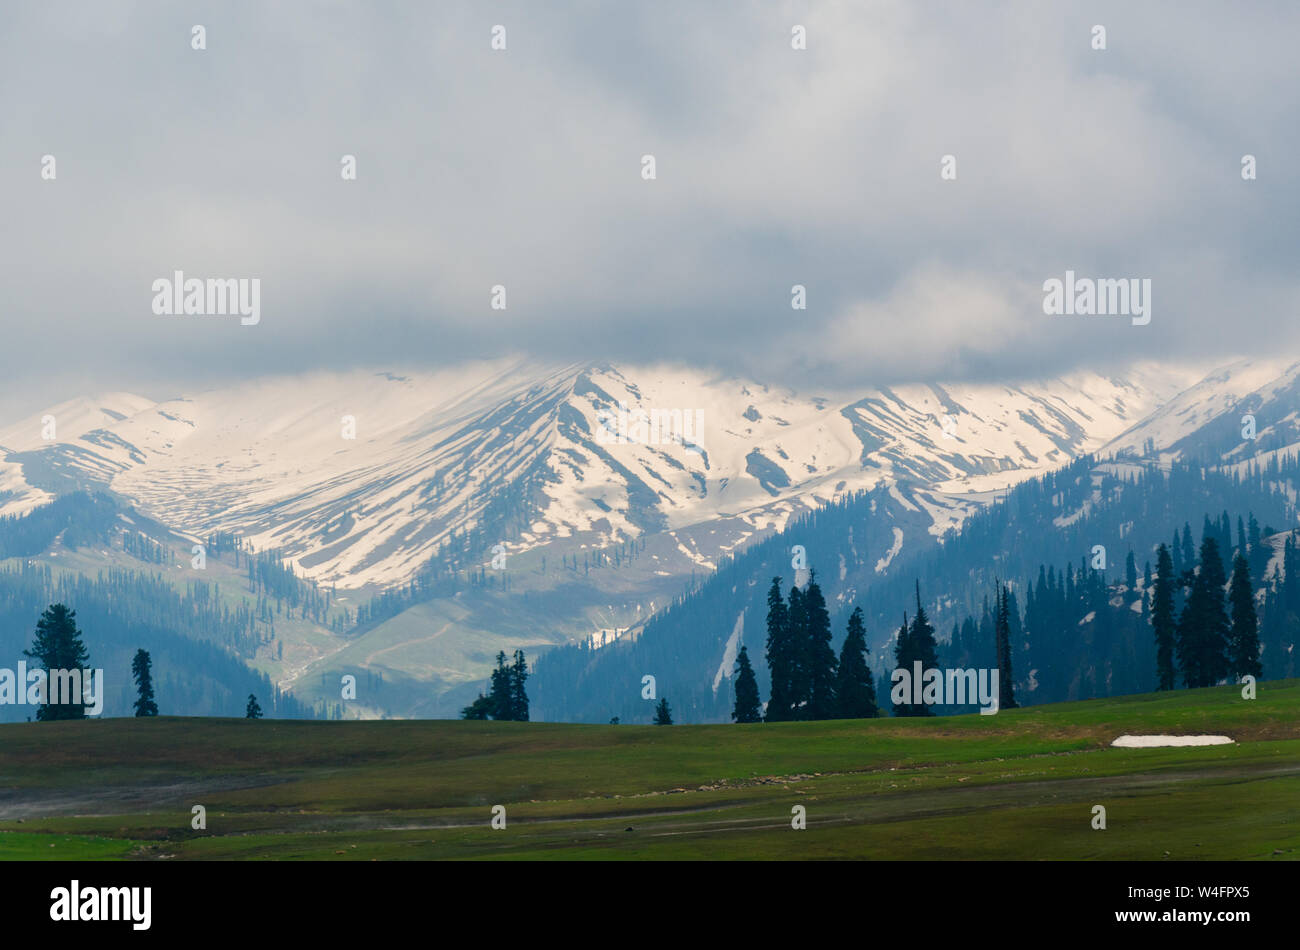 View of snow capped mountains on a cloudy day from Gulmarg Gondola Phase 1 that is Kongdori, Gulmarg, Jammu and Kashmir, India Stock Photo